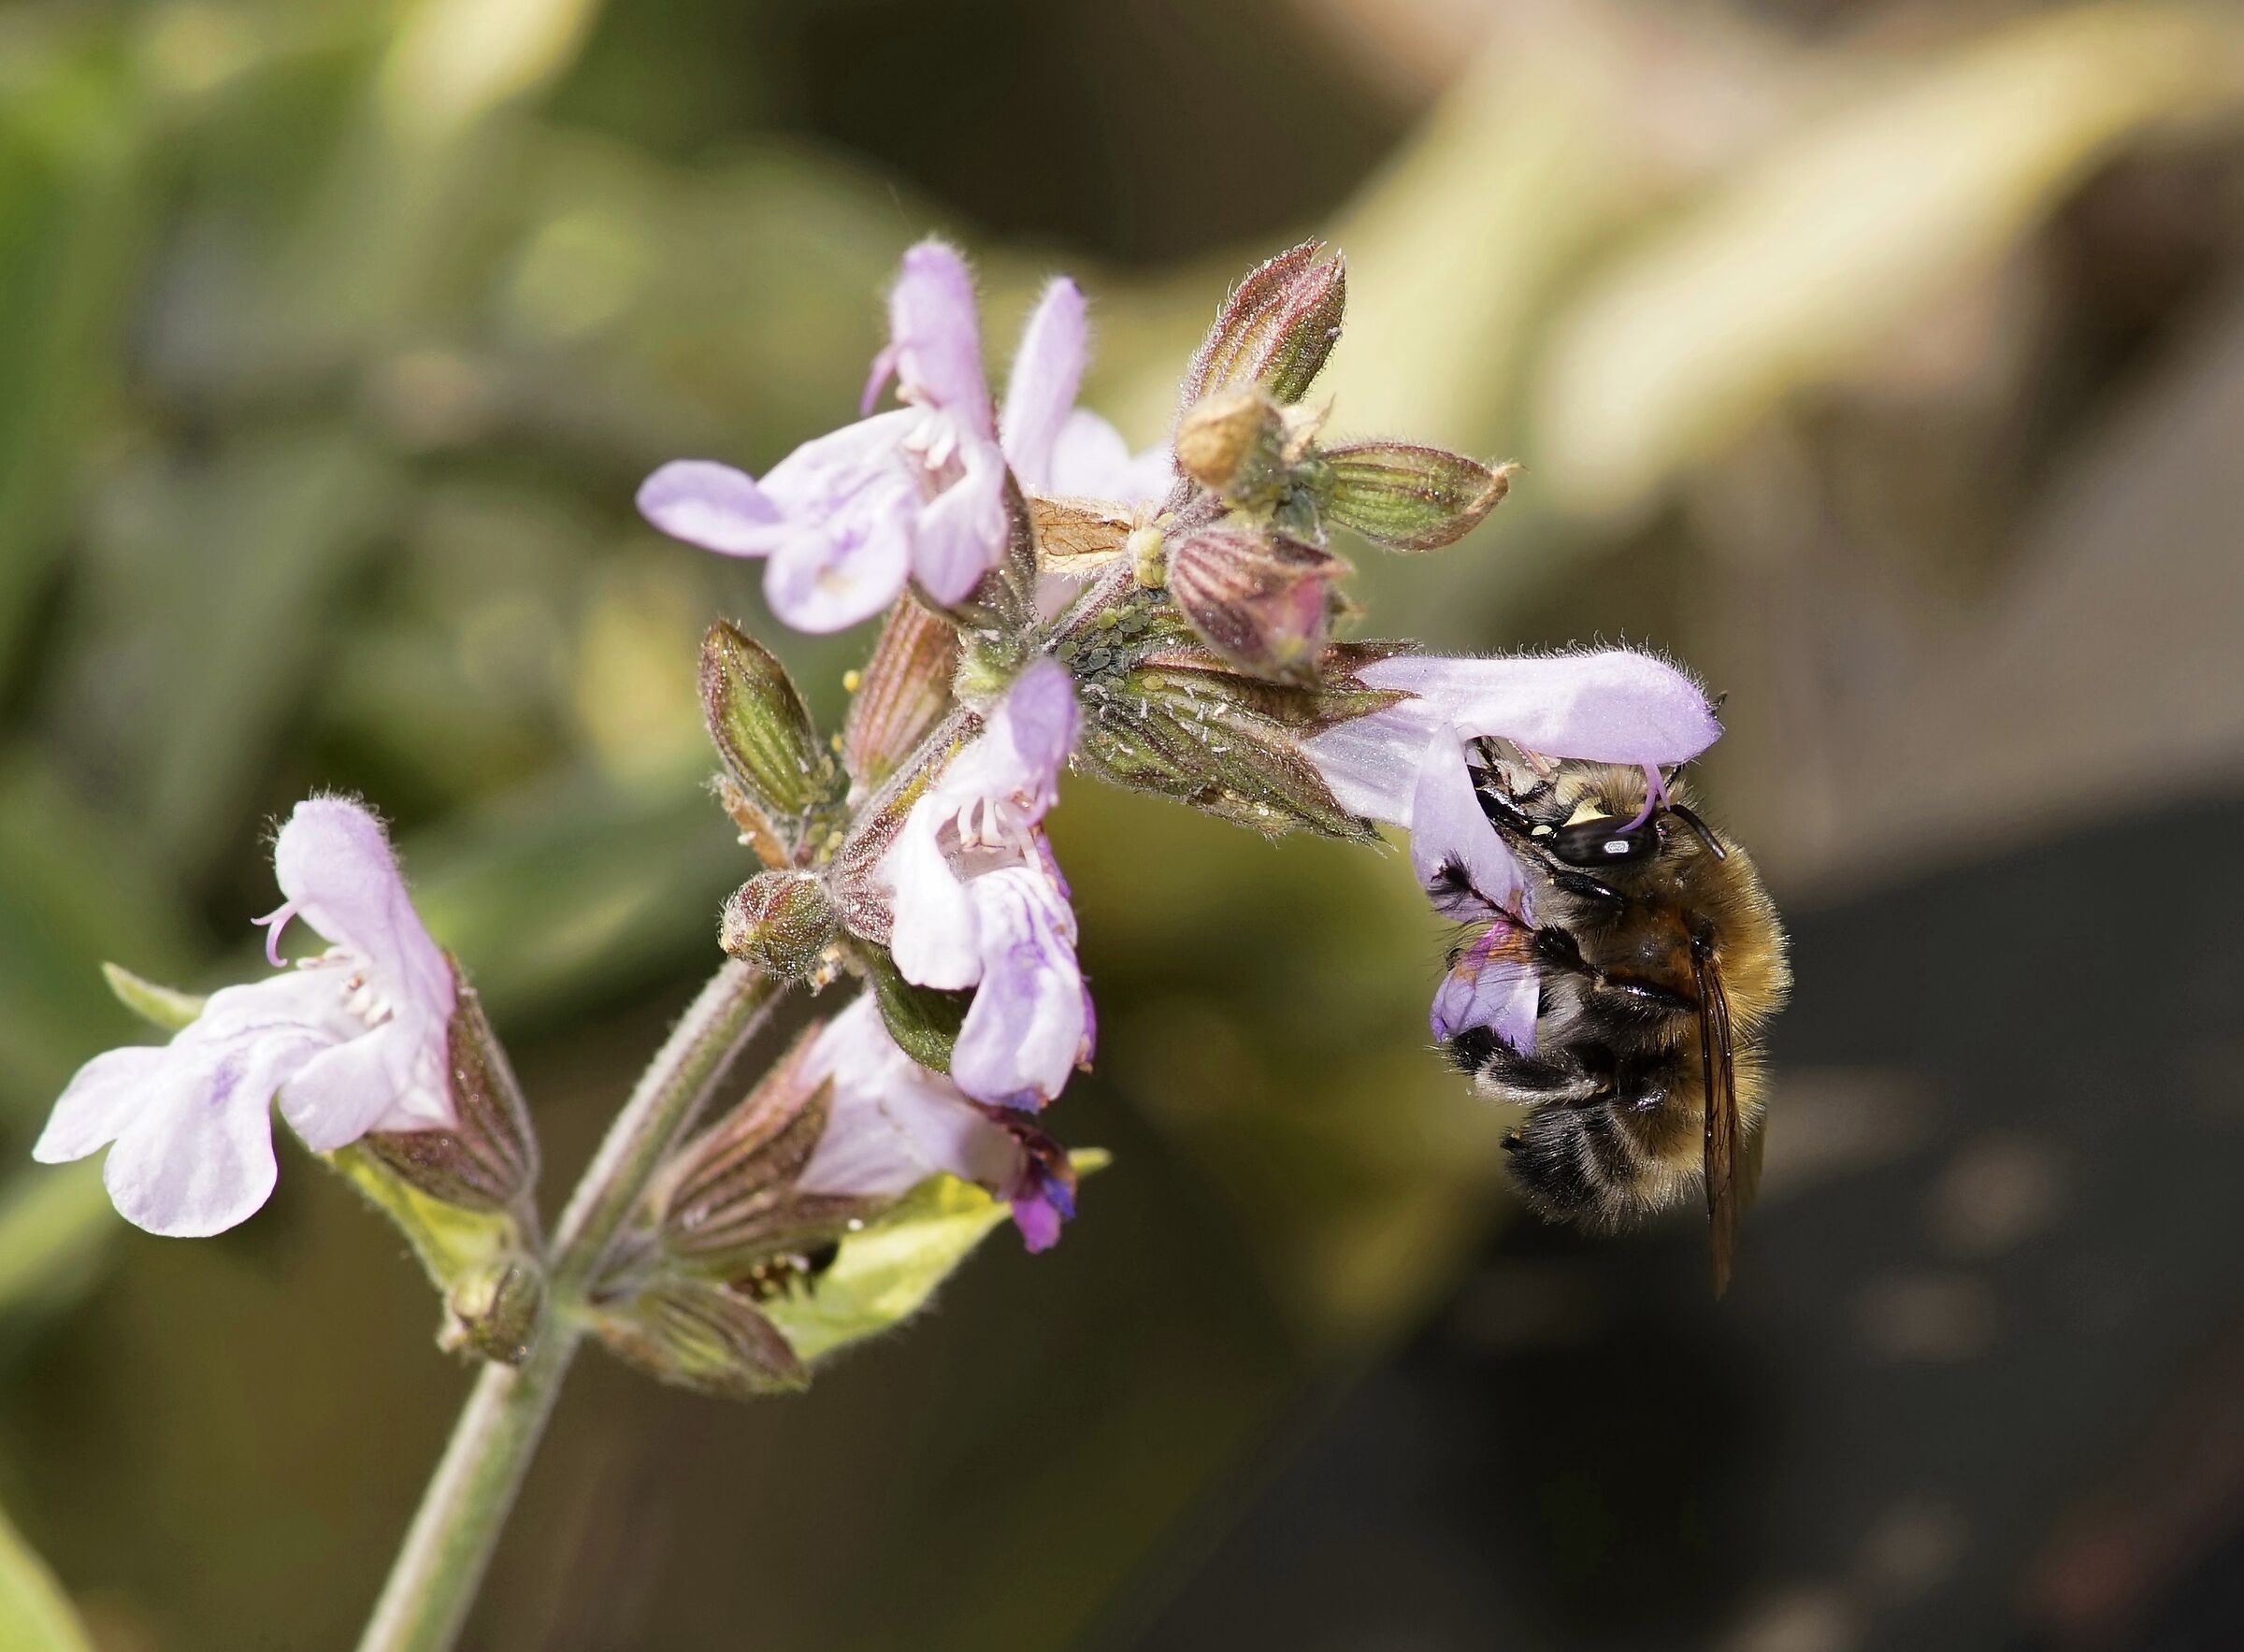 First bees circulating on sage flowers...